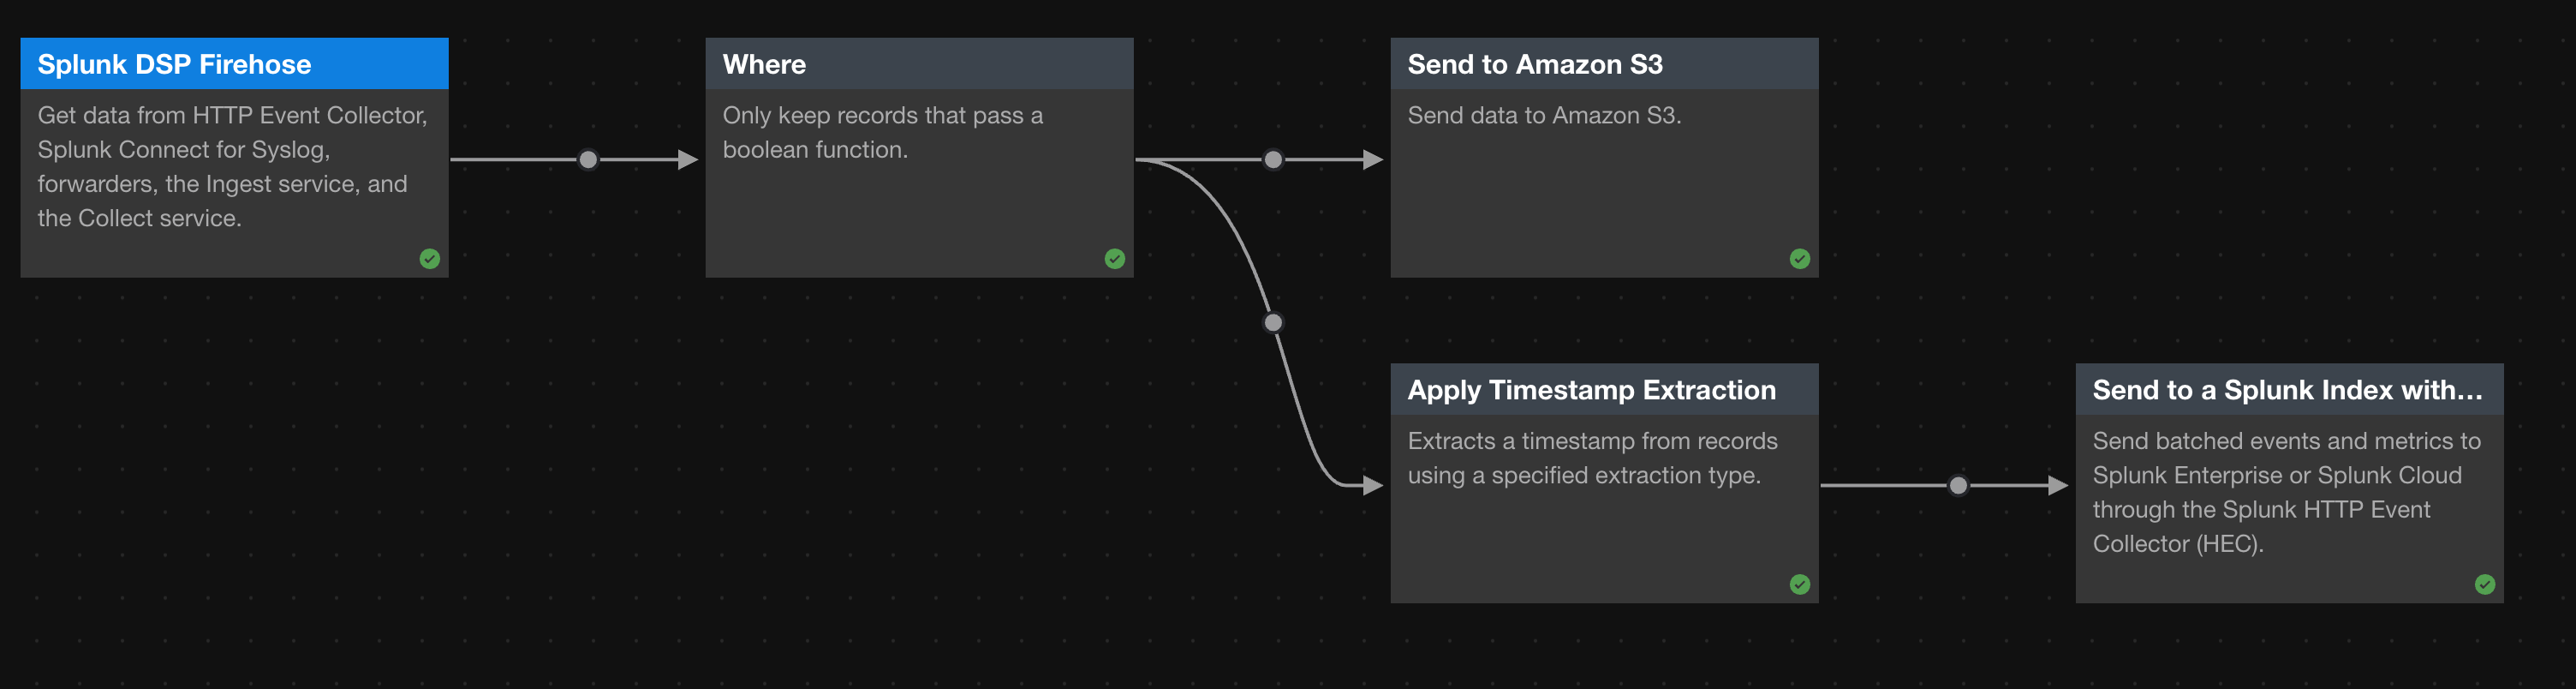 This screenshot shows a pipeline with two branches created using SPL2 in the Splunk Data Stream Processor.